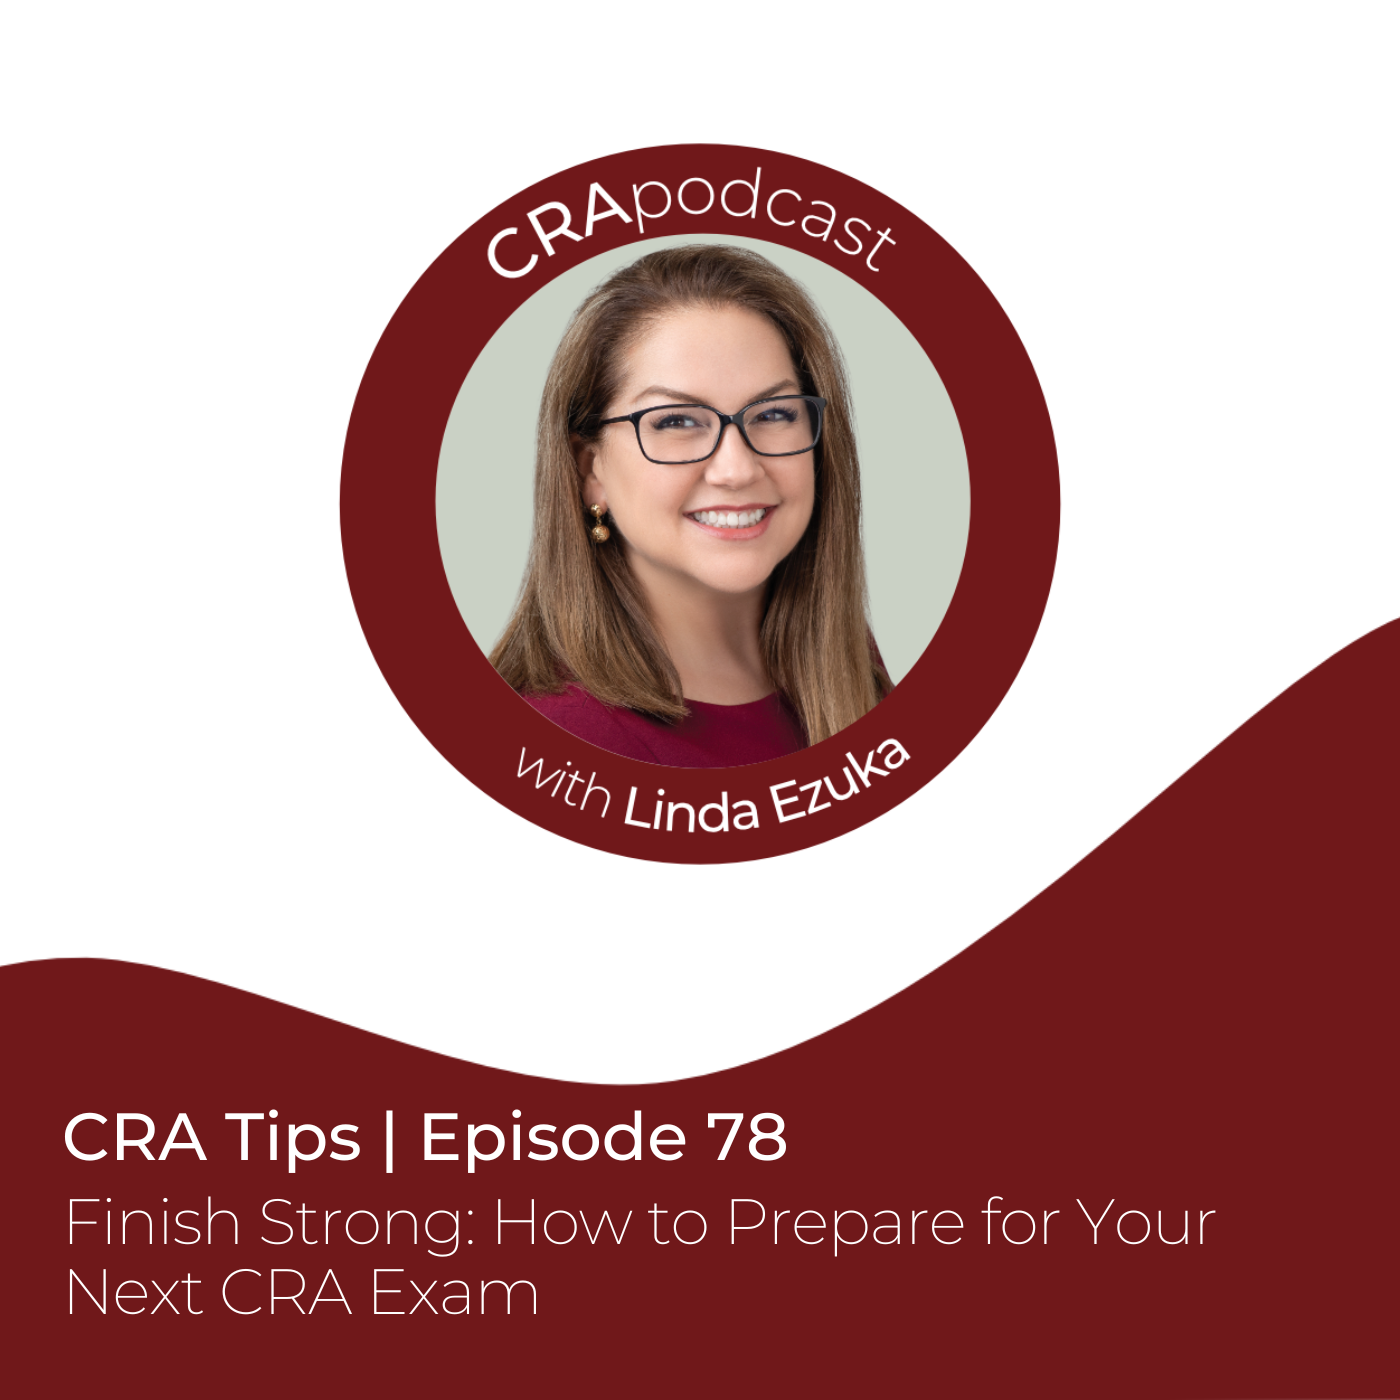 Episode 78: CRA Tips: Finish Strong: How to Prepare for Your Next CRA Exam